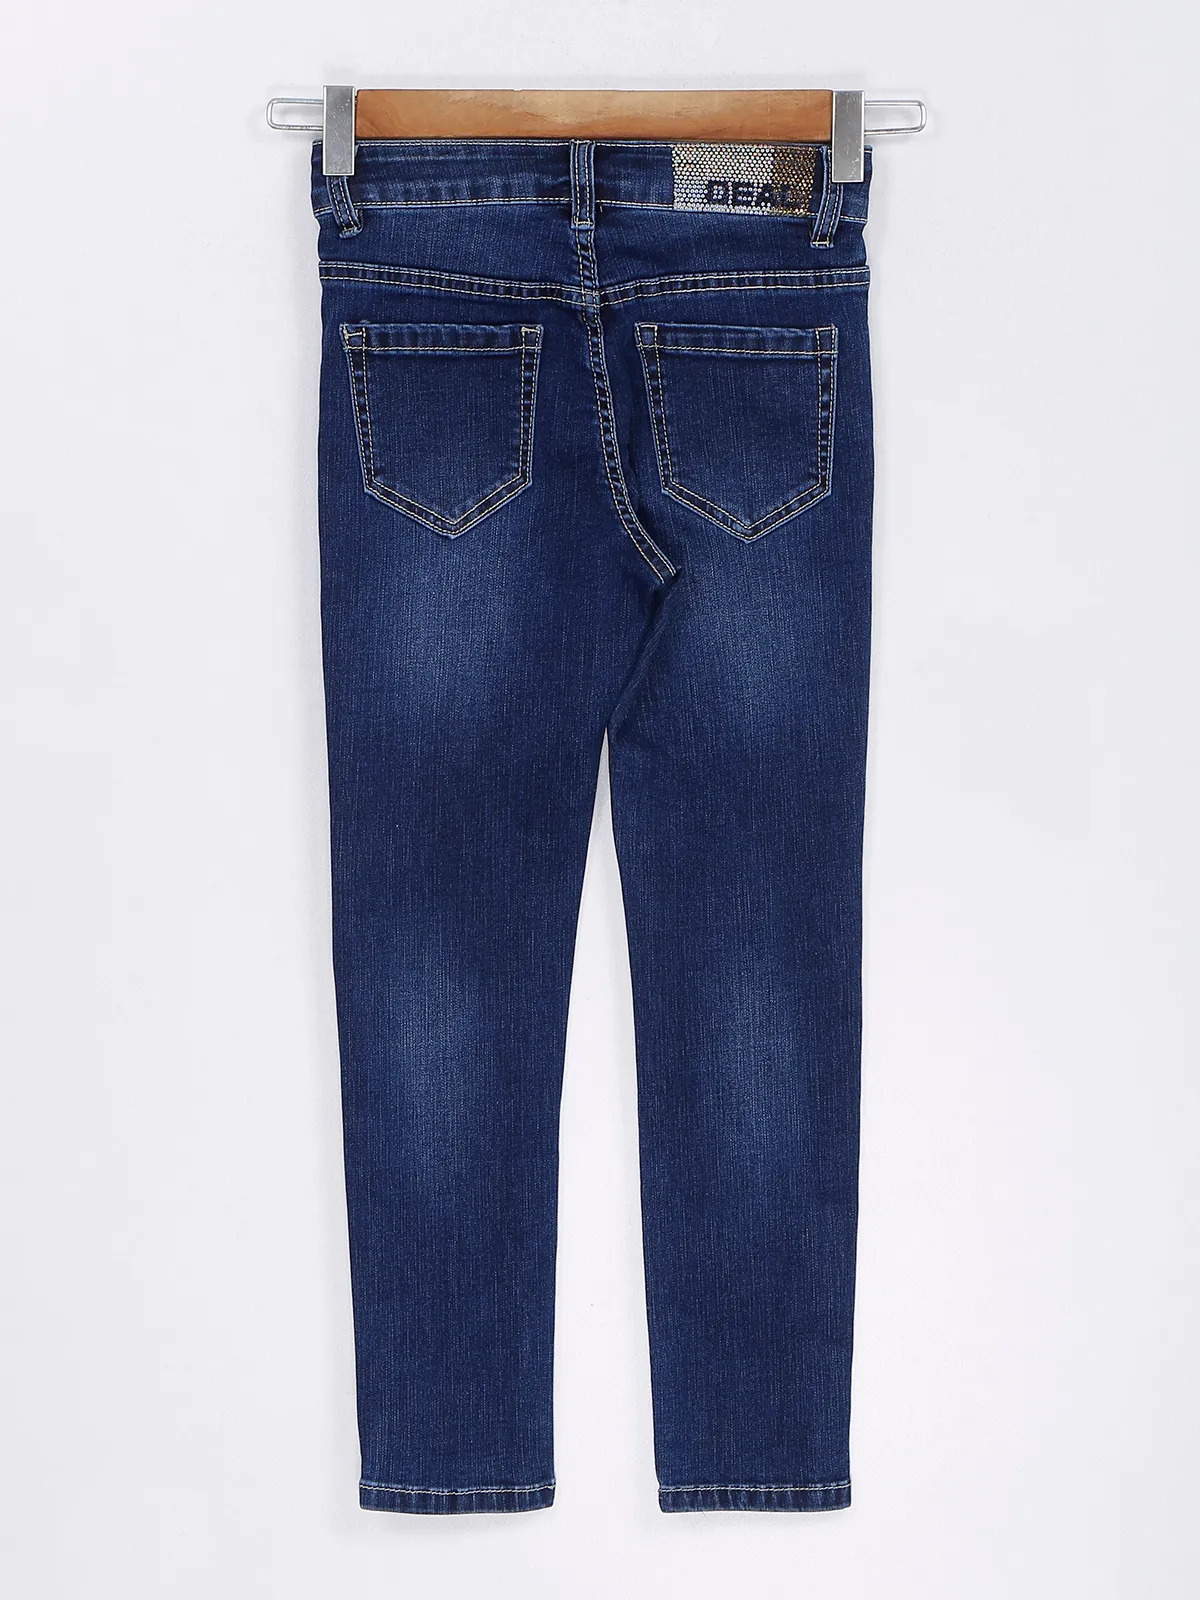 Deal washed jeans for girls in navy